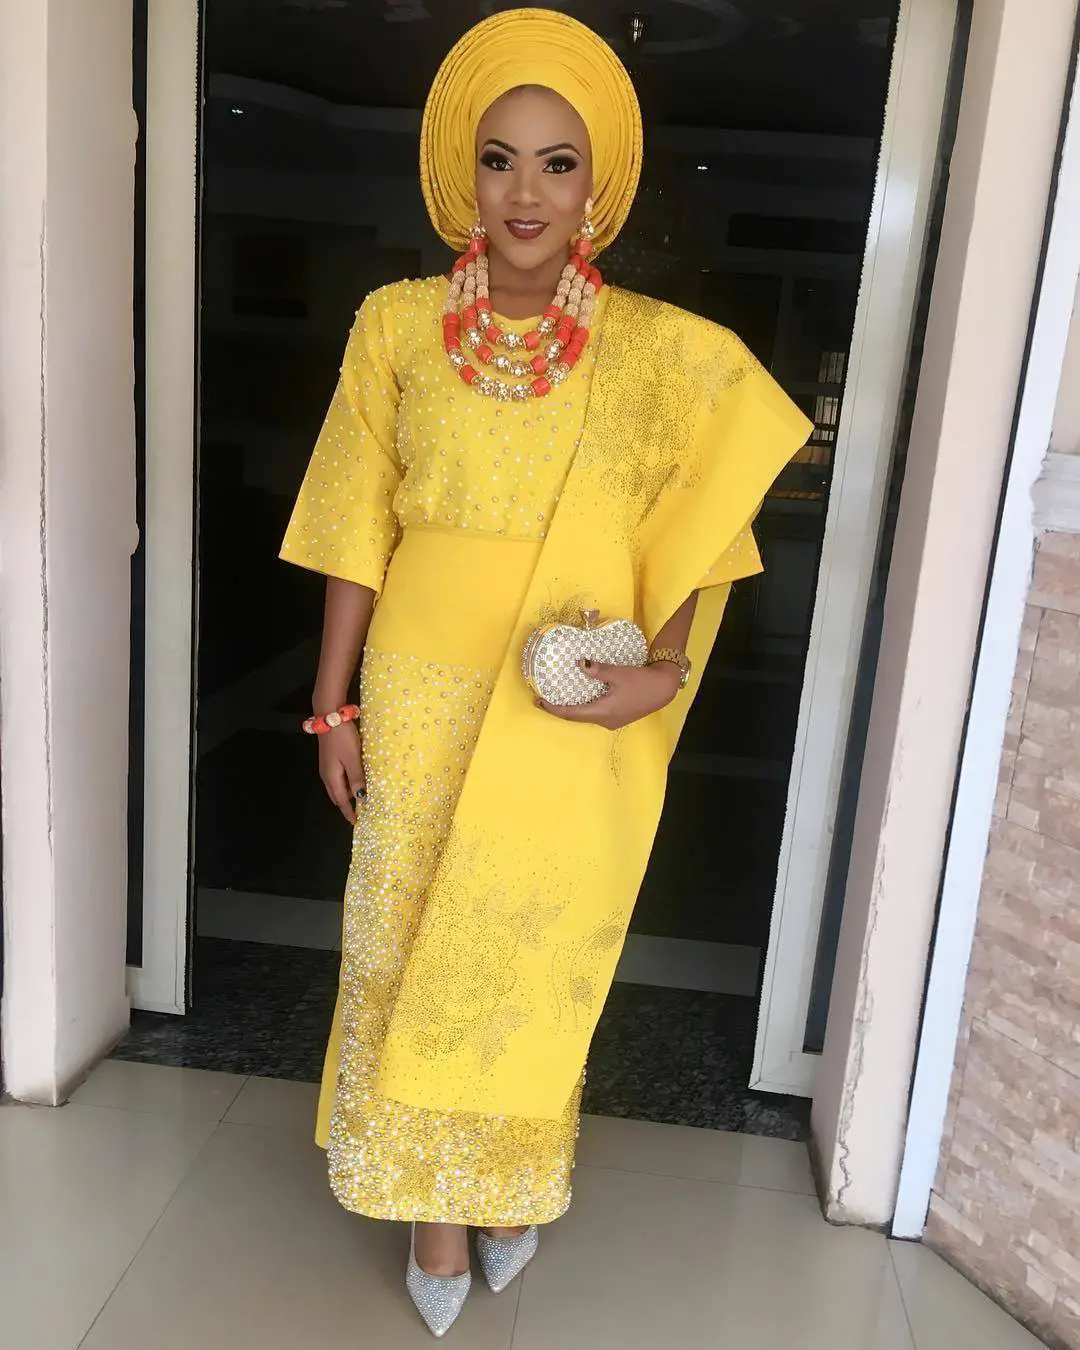 All Shades Of Beautiful Nigerian Brides Traditional Outfits